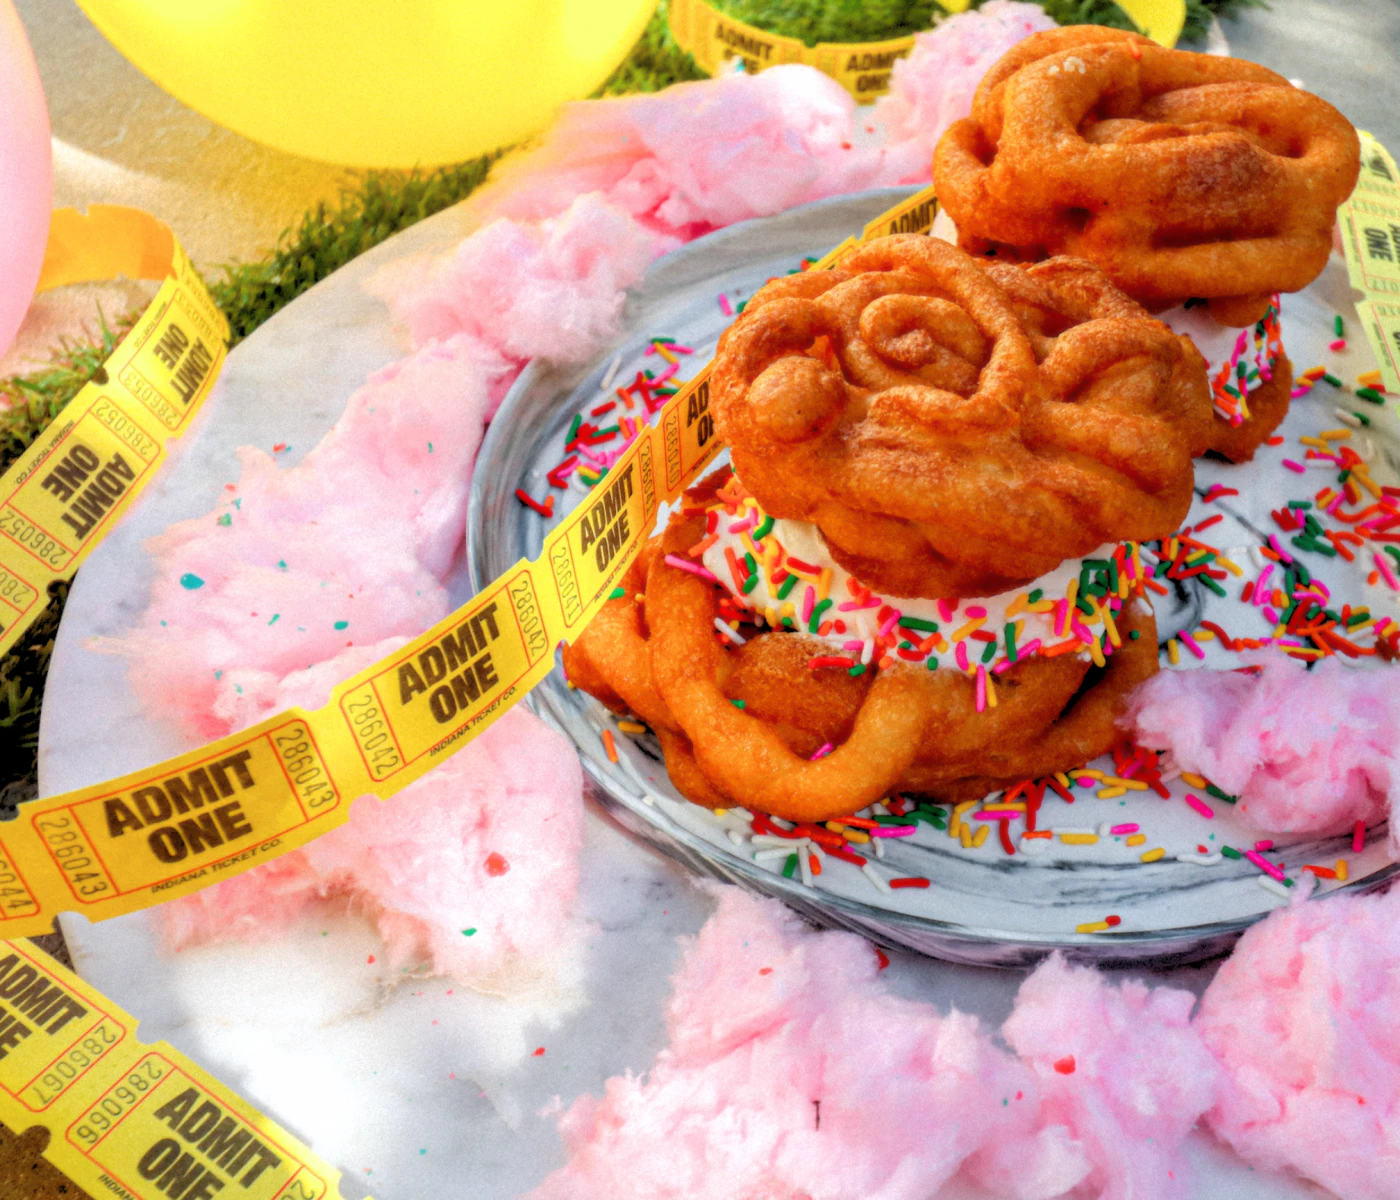 Funnel cake ice cream sandwiches with cotton candy and carnival tickets.